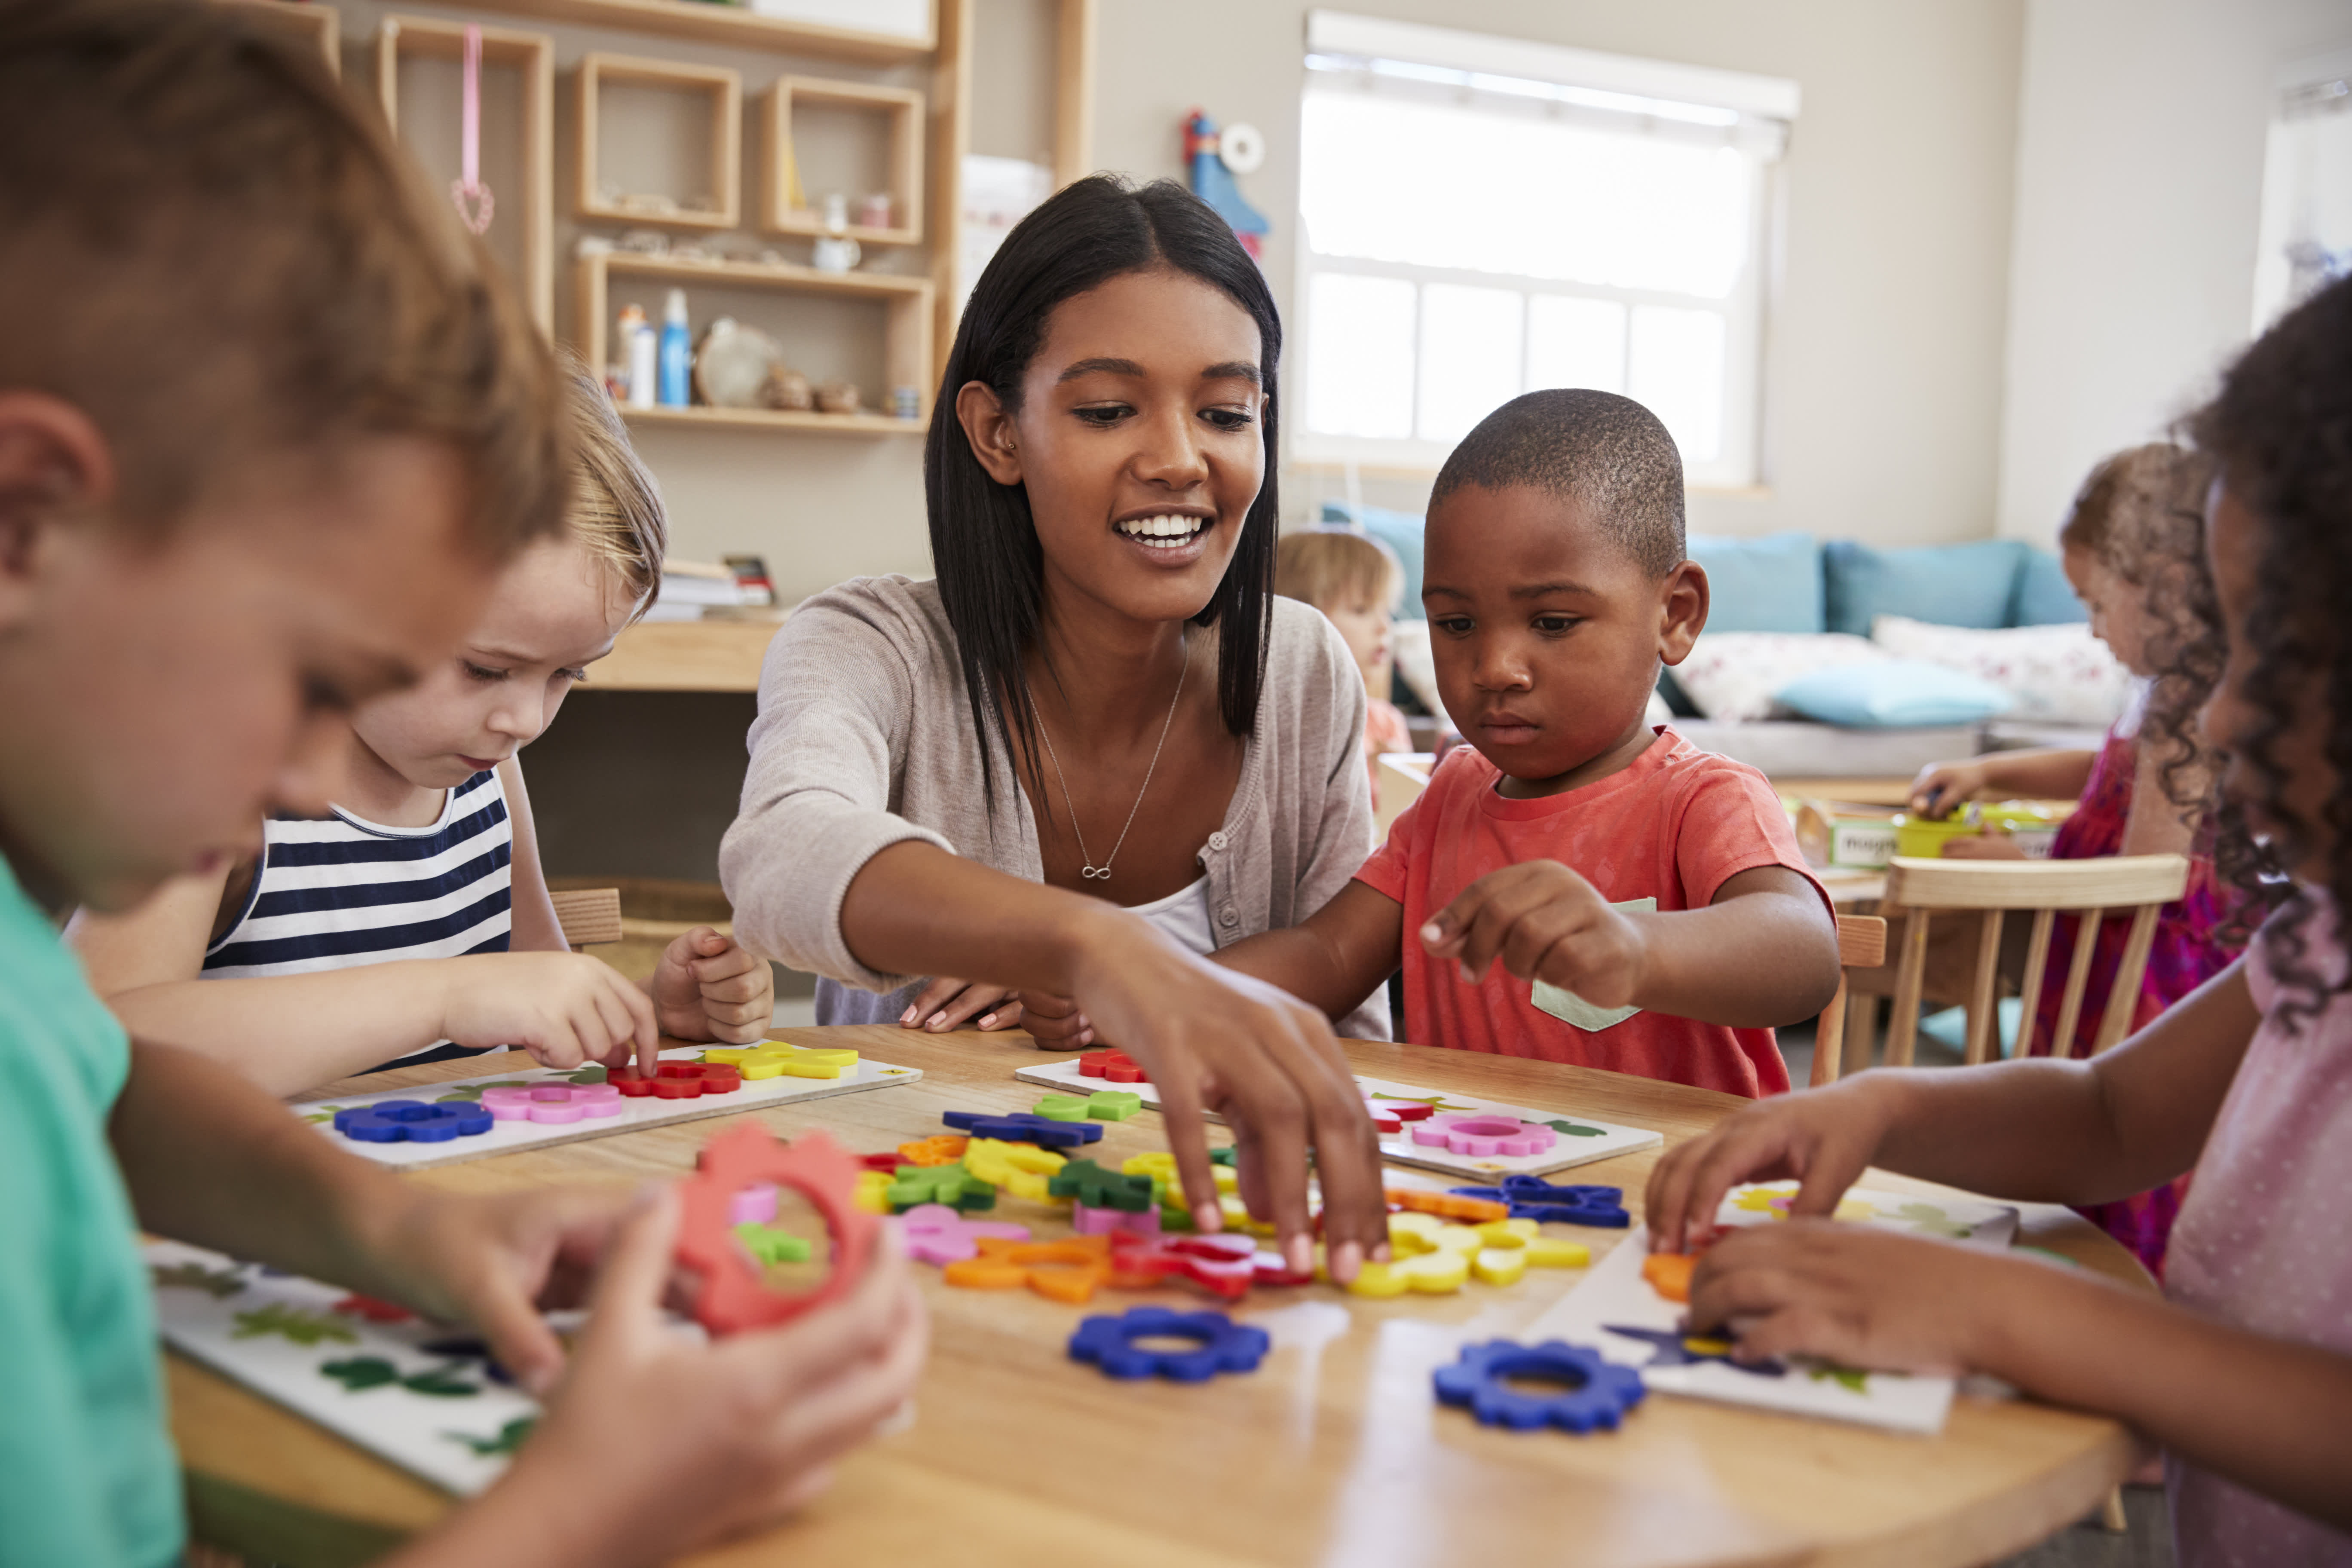 Your 2021 child care costs could mean an $8,000 tax credit. Here's who qualifies